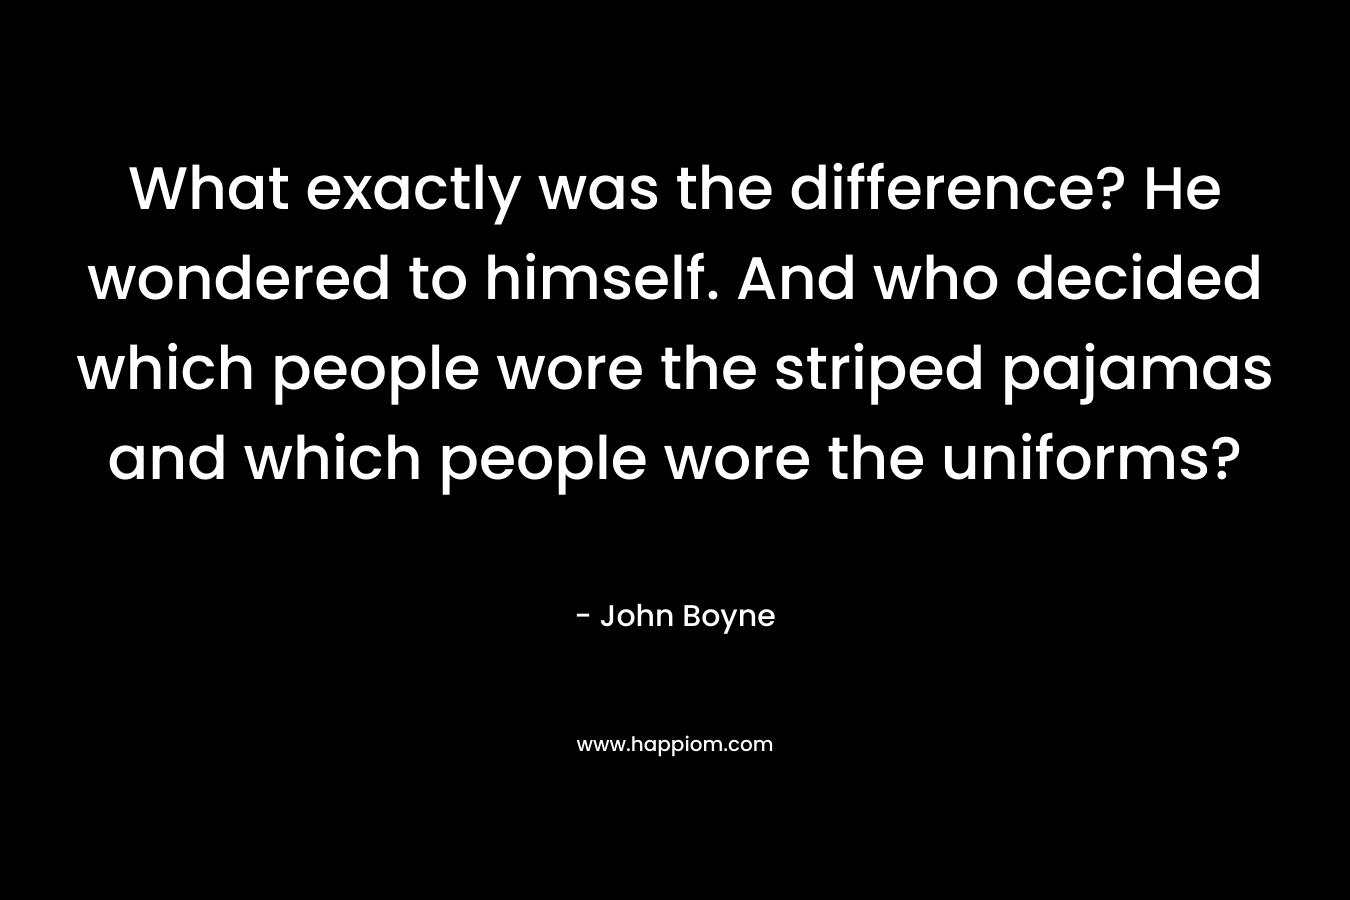 What exactly was the difference? He wondered to himself. And who decided which people wore the striped pajamas and which people wore the uniforms? – John Boyne